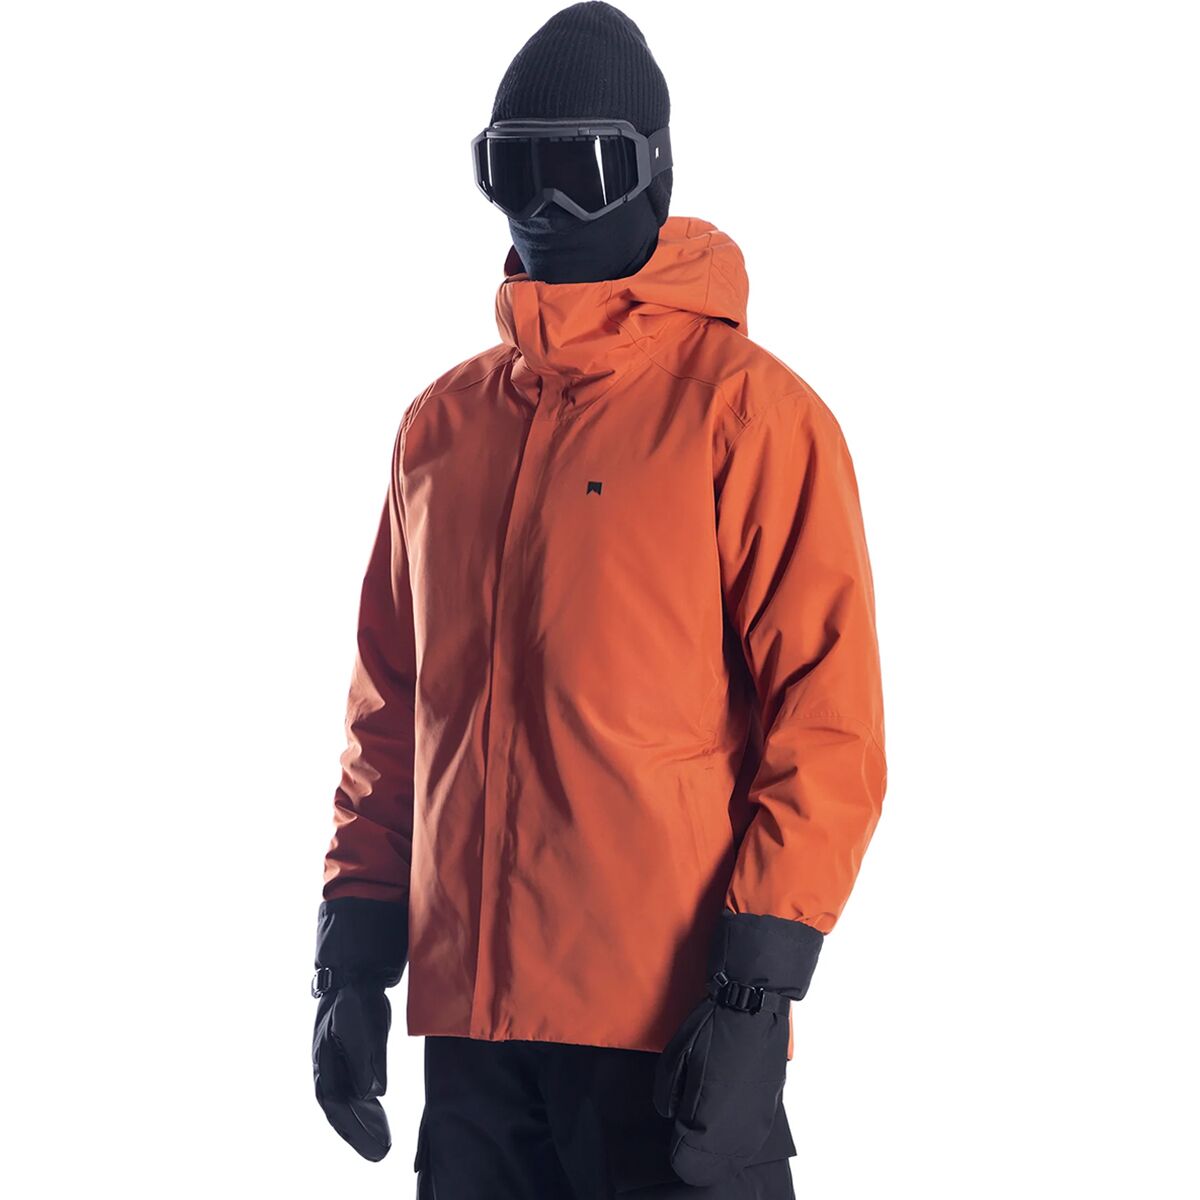 Candide C1 Insulated Jacket - Men's